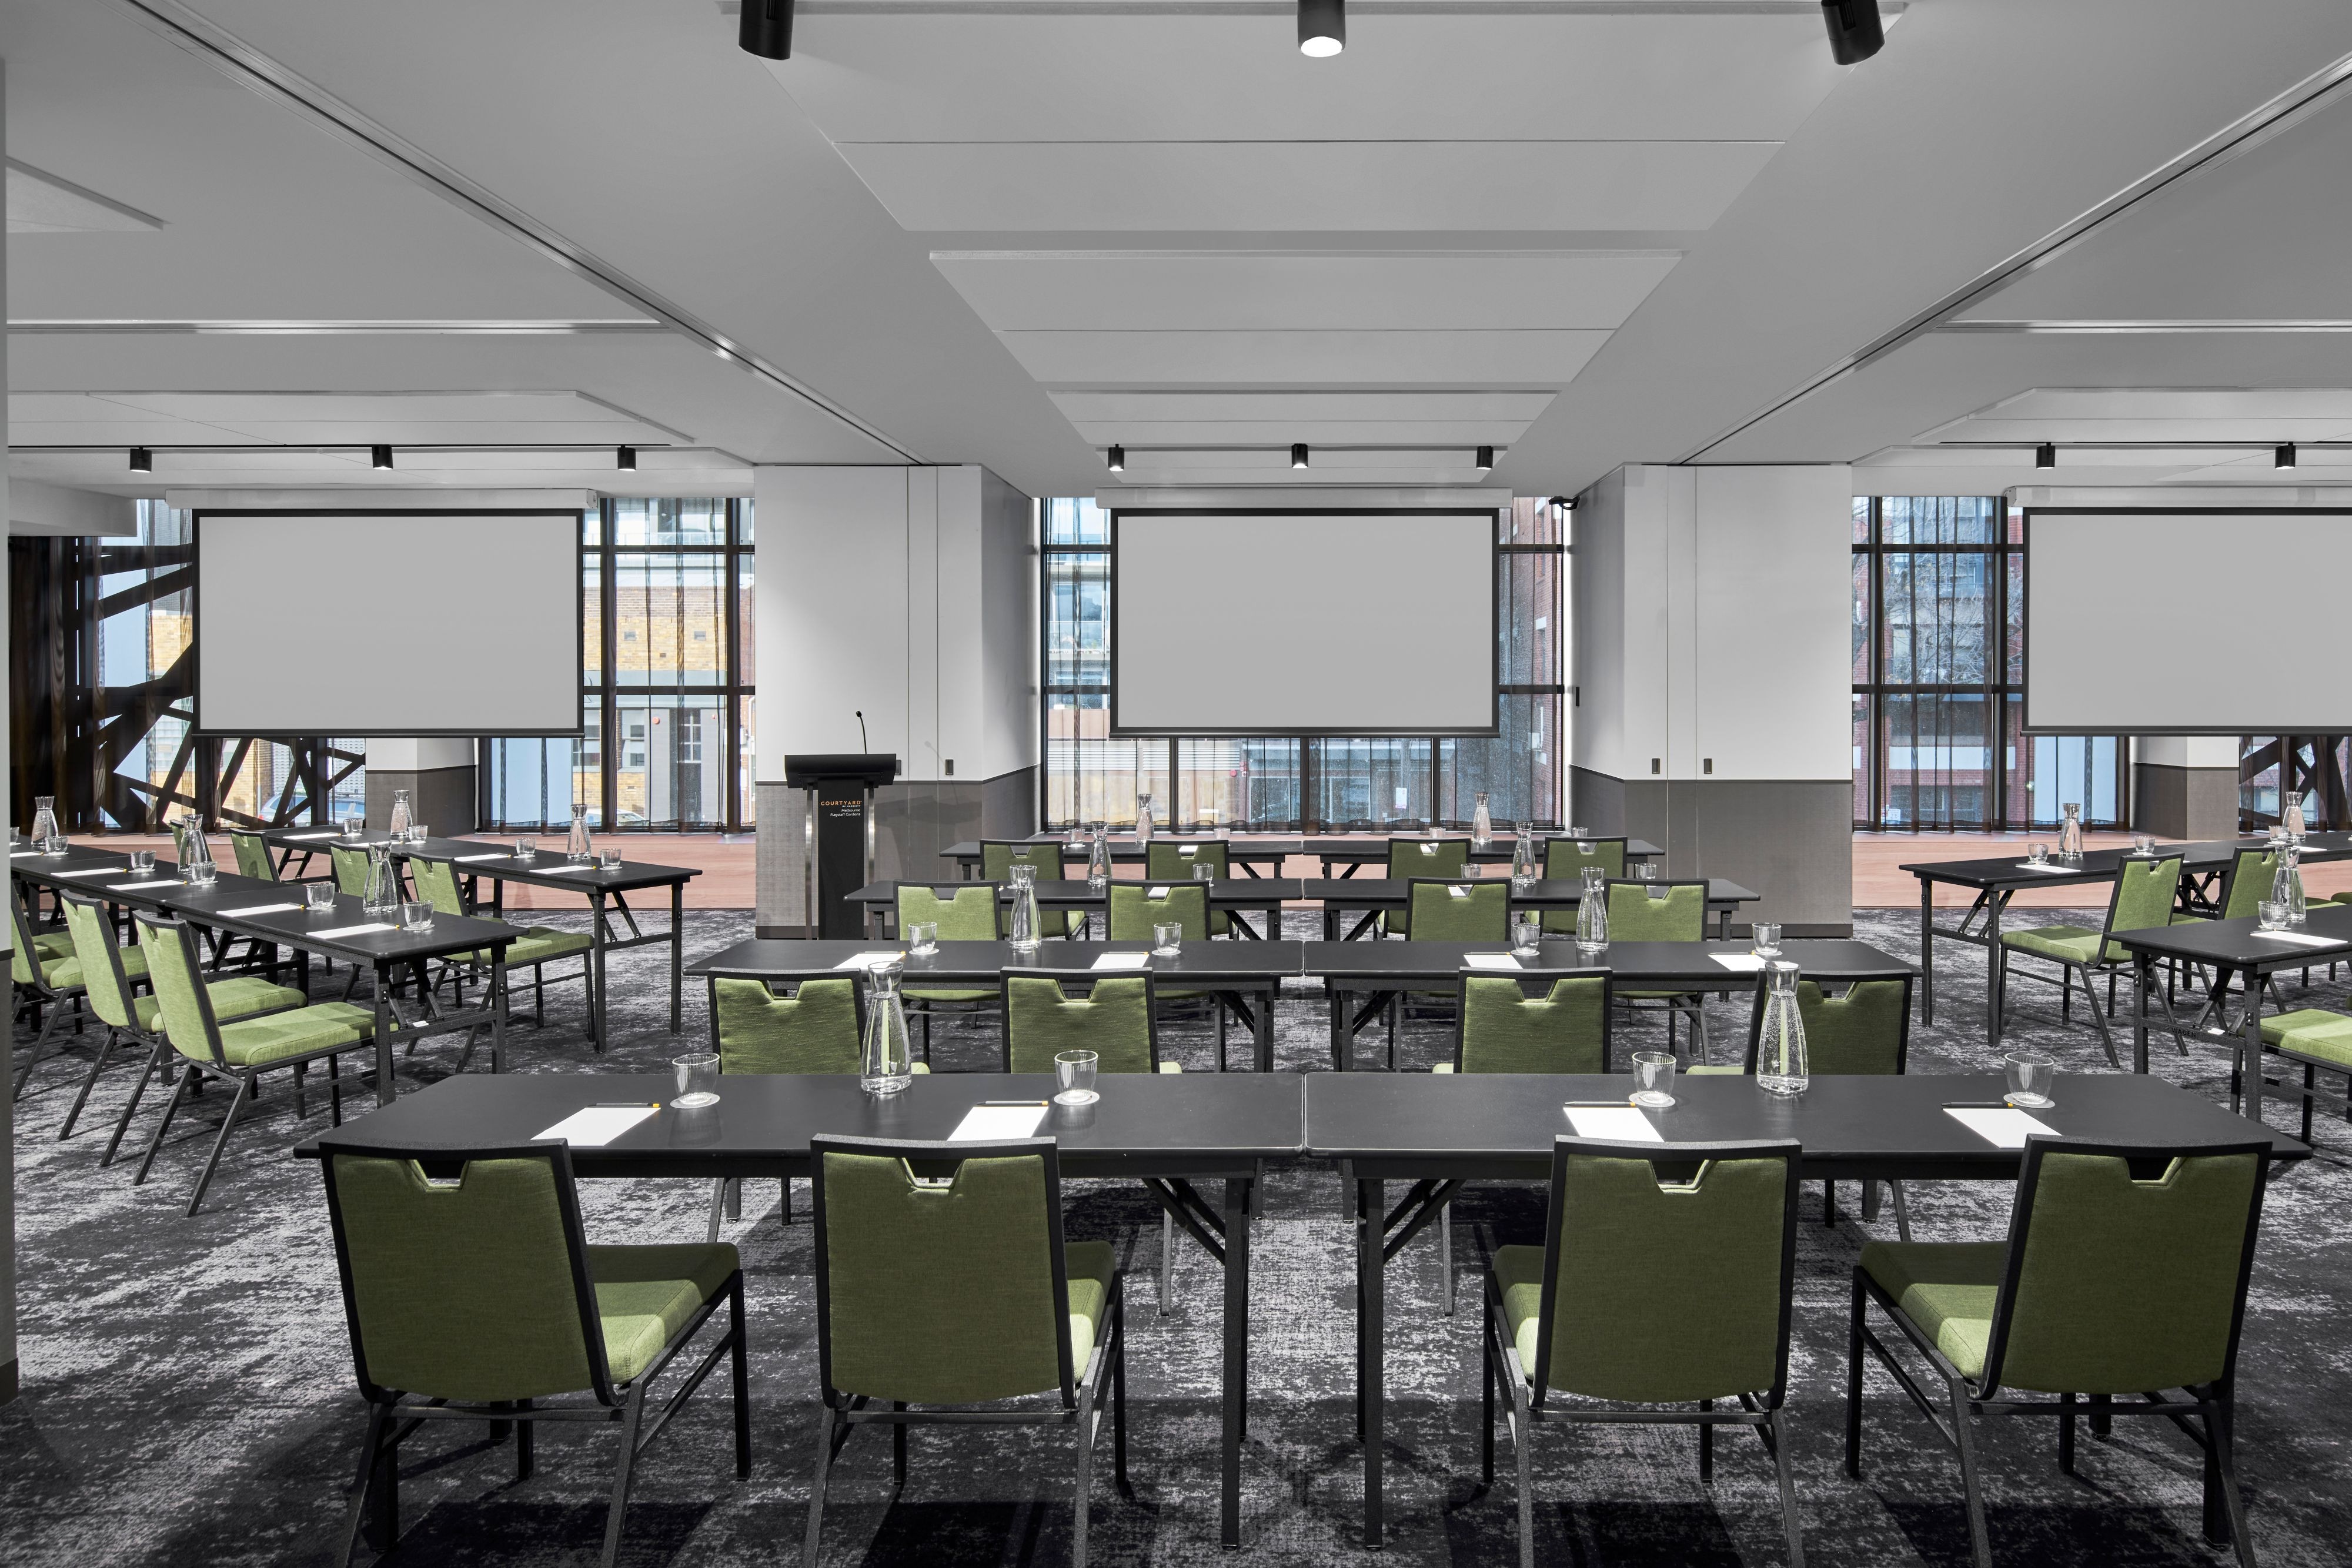 Meeting room with multiple tables and projector sreens